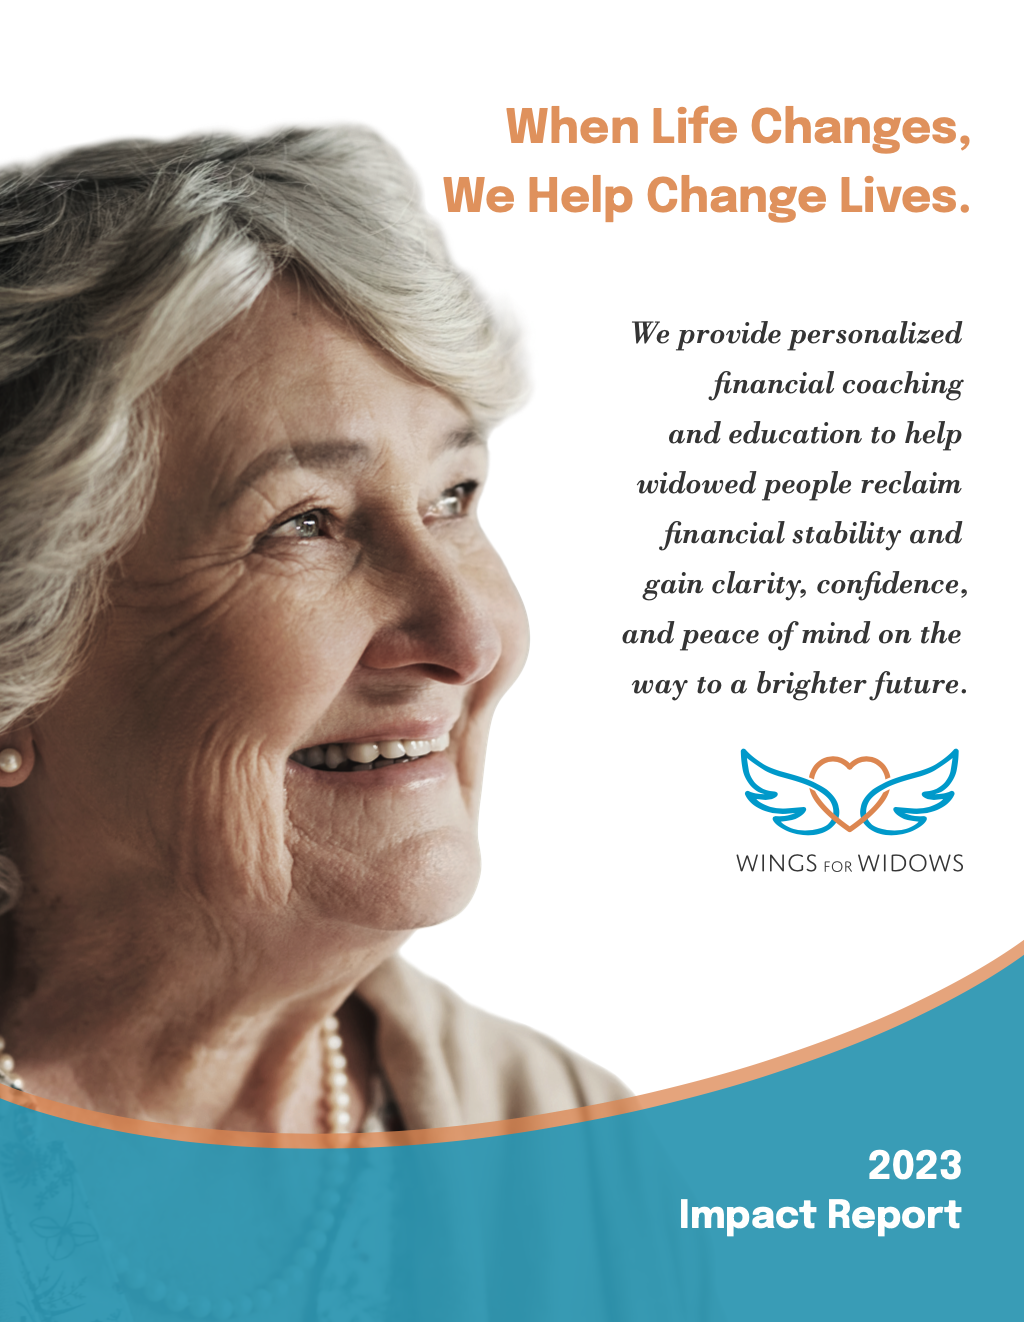 Wings for Widows 2023 Impact report